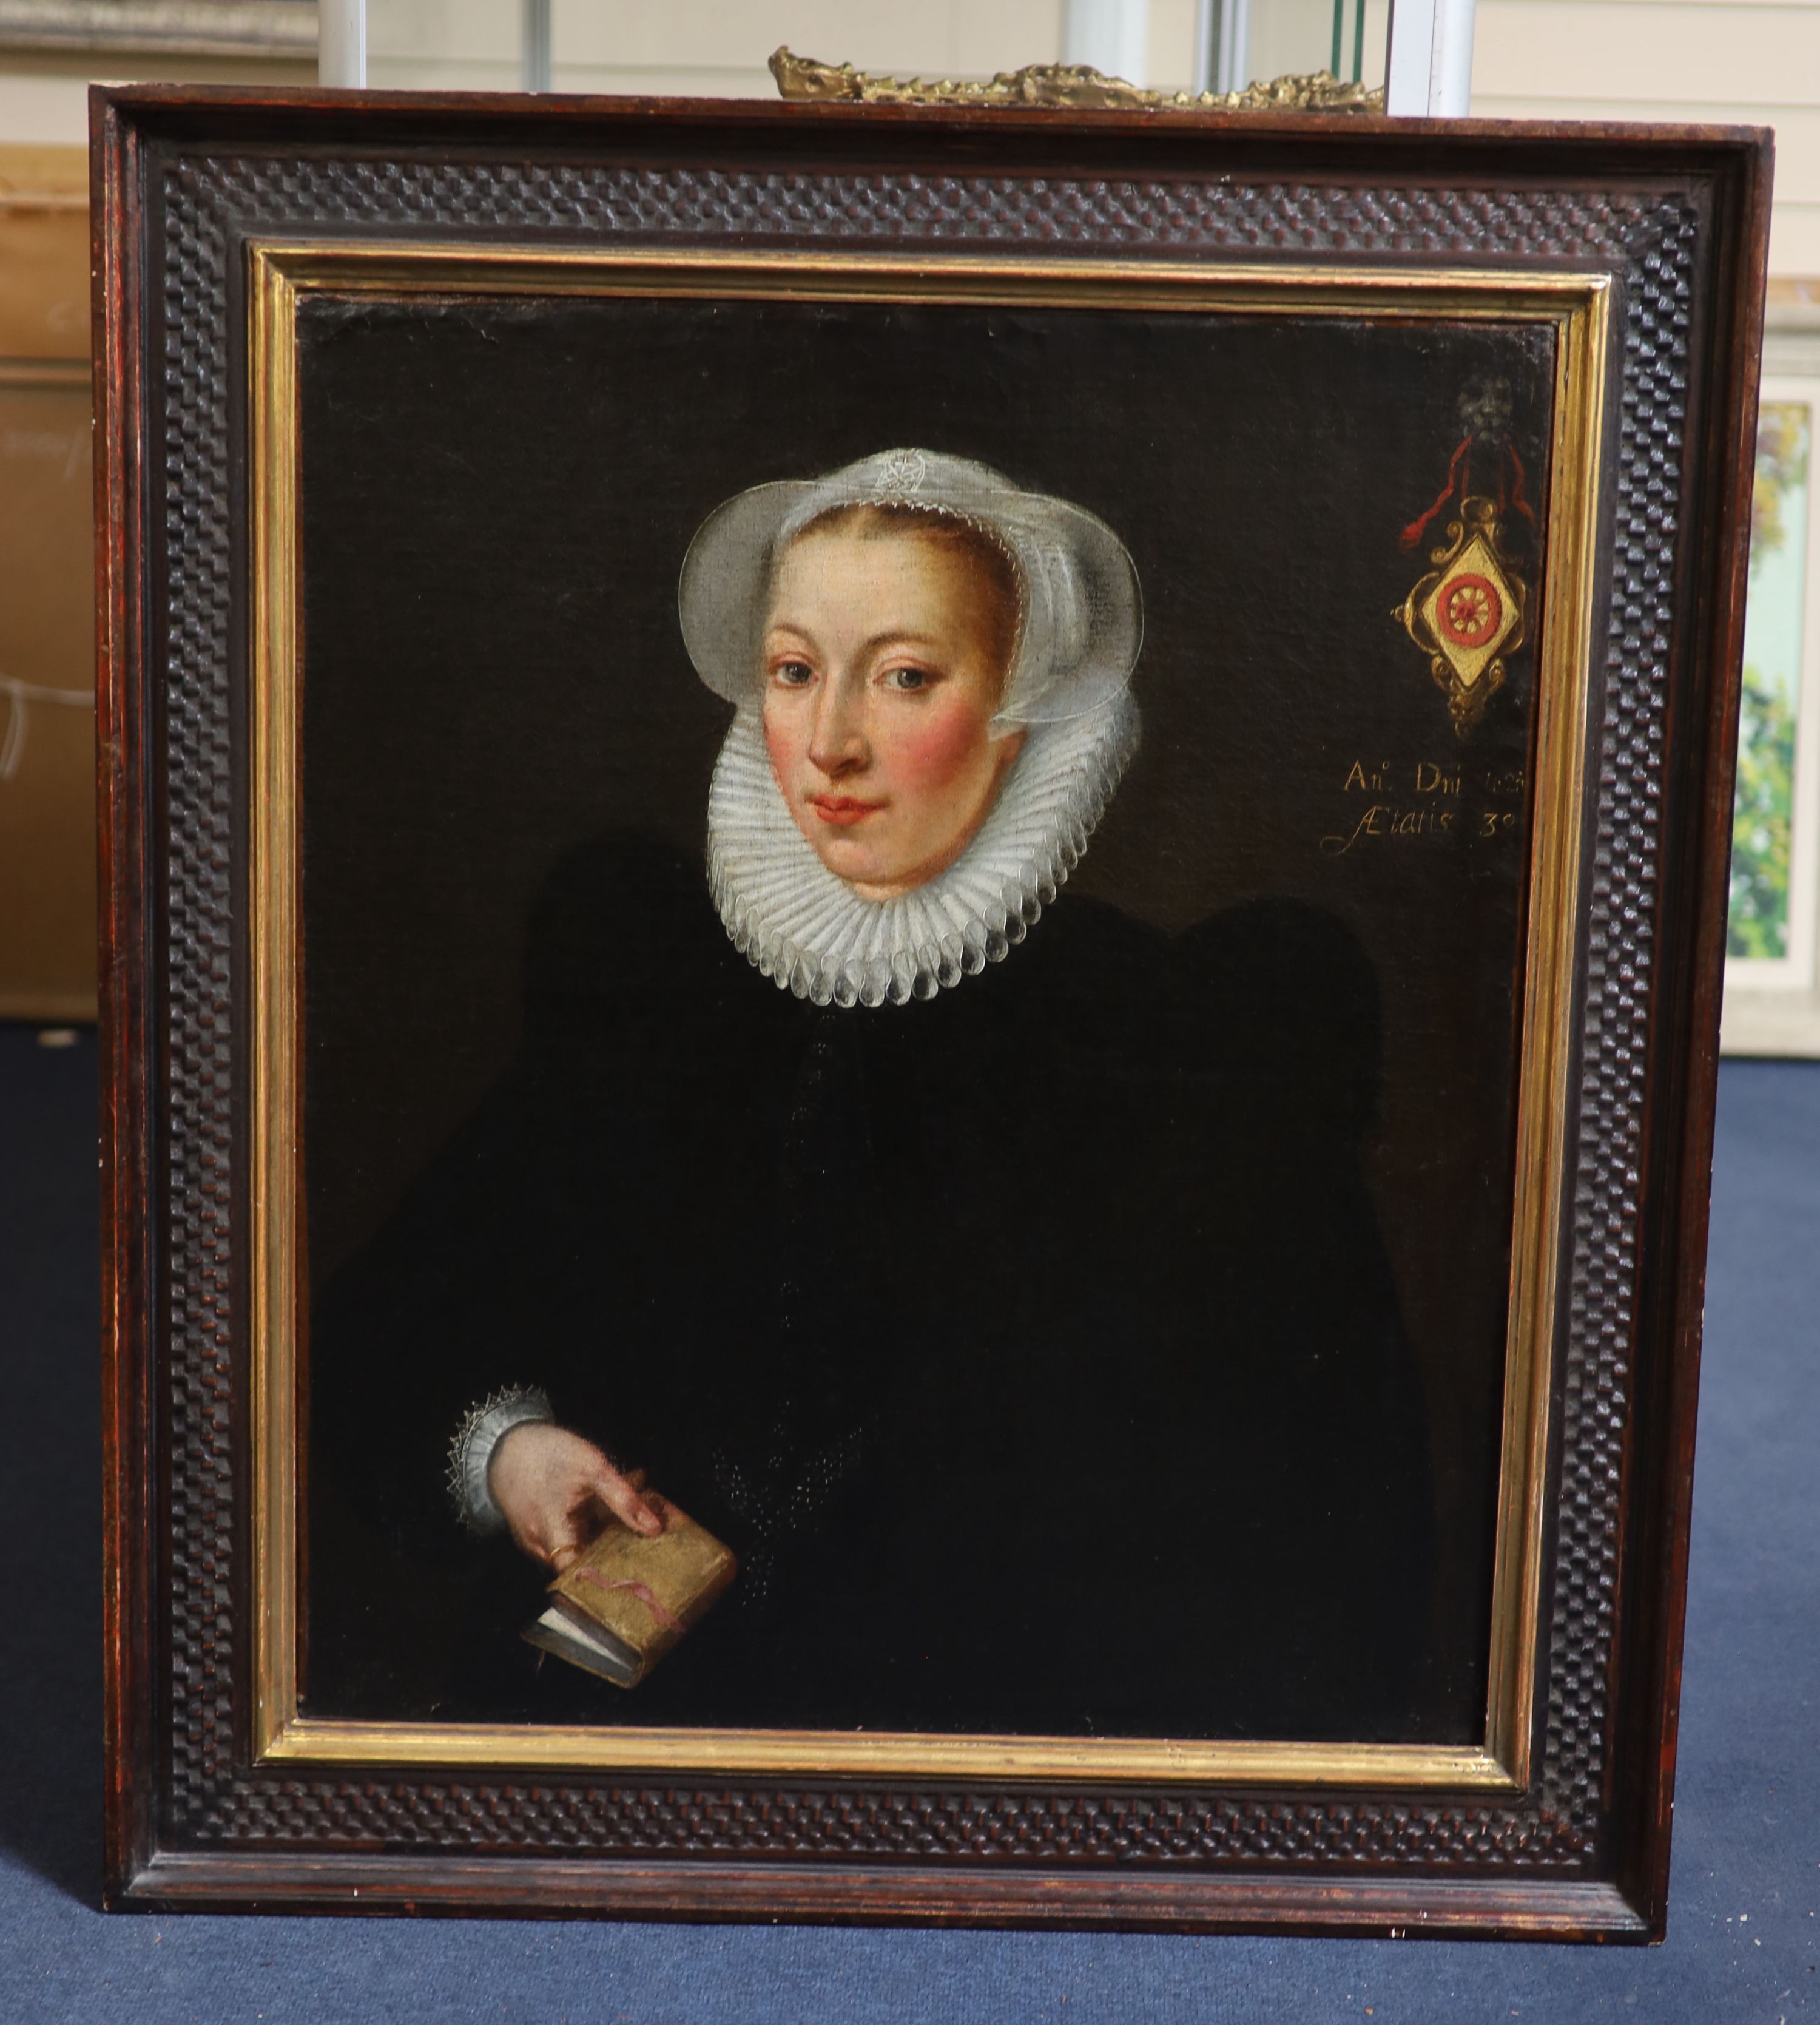 Follower of Goerztius Geldorp (1553-1618), Portrait of a Lady Aged 38, dated 1625, oil on canvas, 77.5 x 65cm